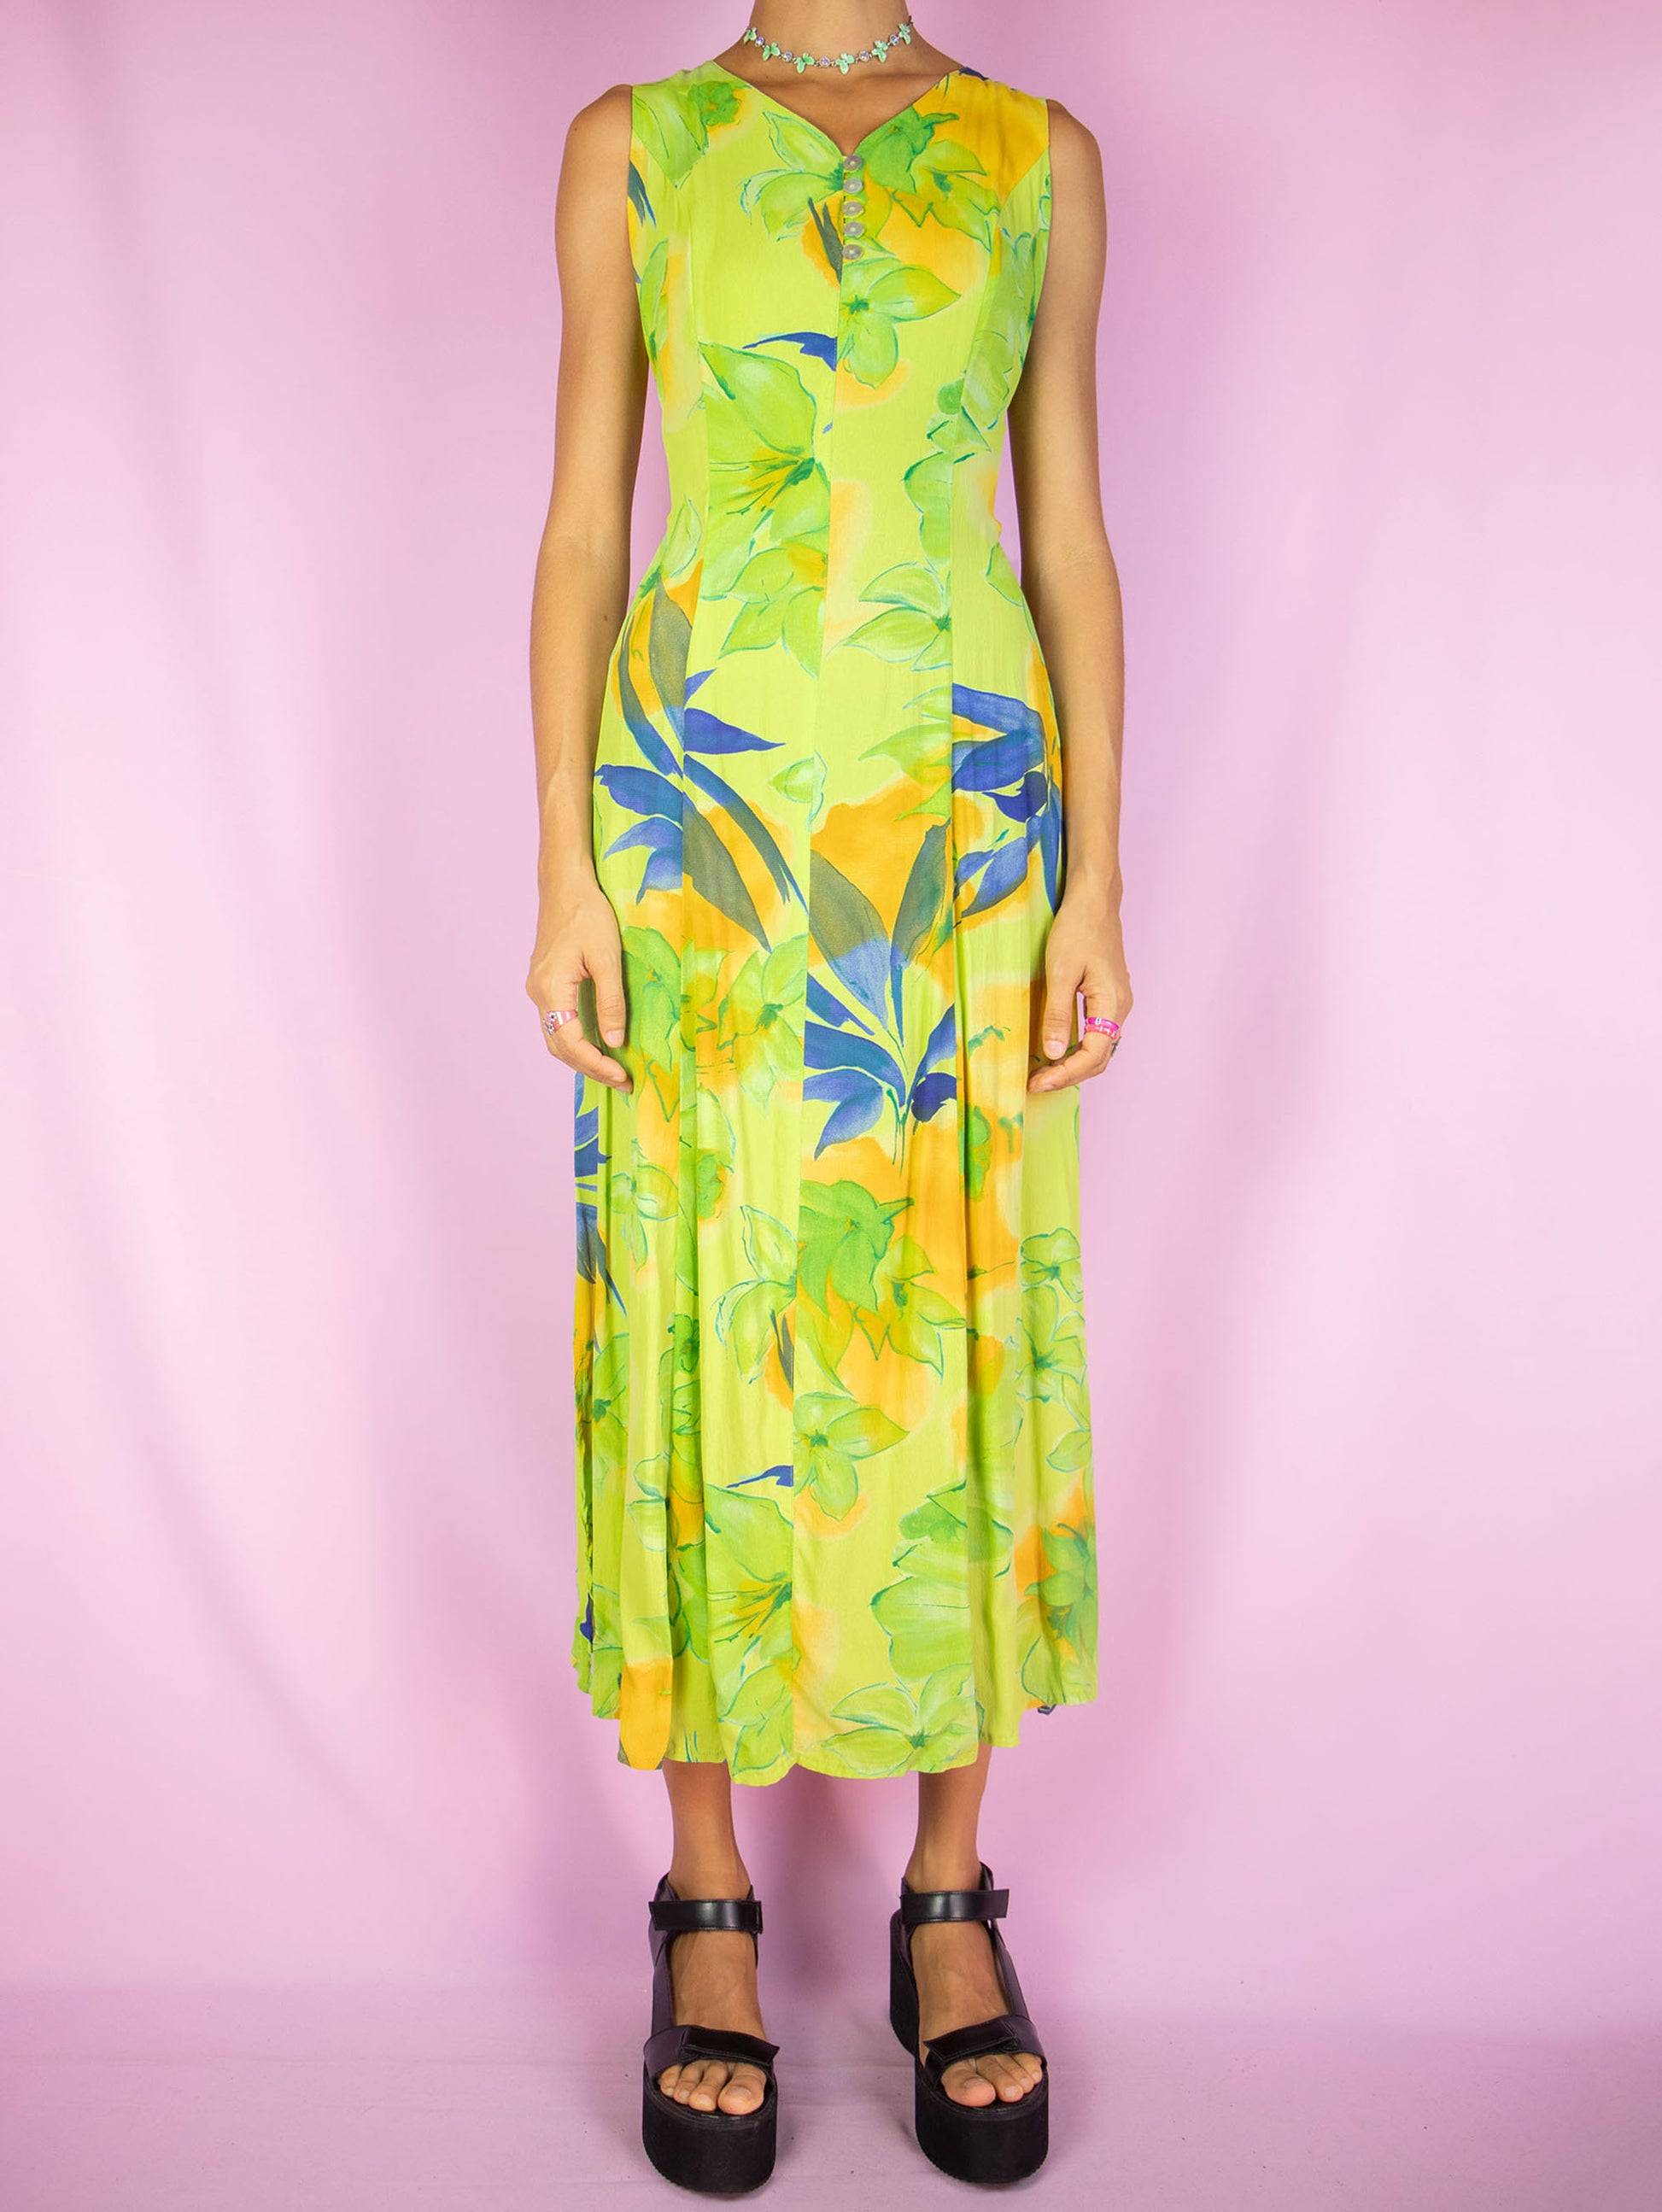 The Vintage 90s Boho Floral Midi Dress is a green multicolor floral sleeveless flared dress with side zipper closure and buttons down the front. Retro summer 1990s flowy maxi dress.